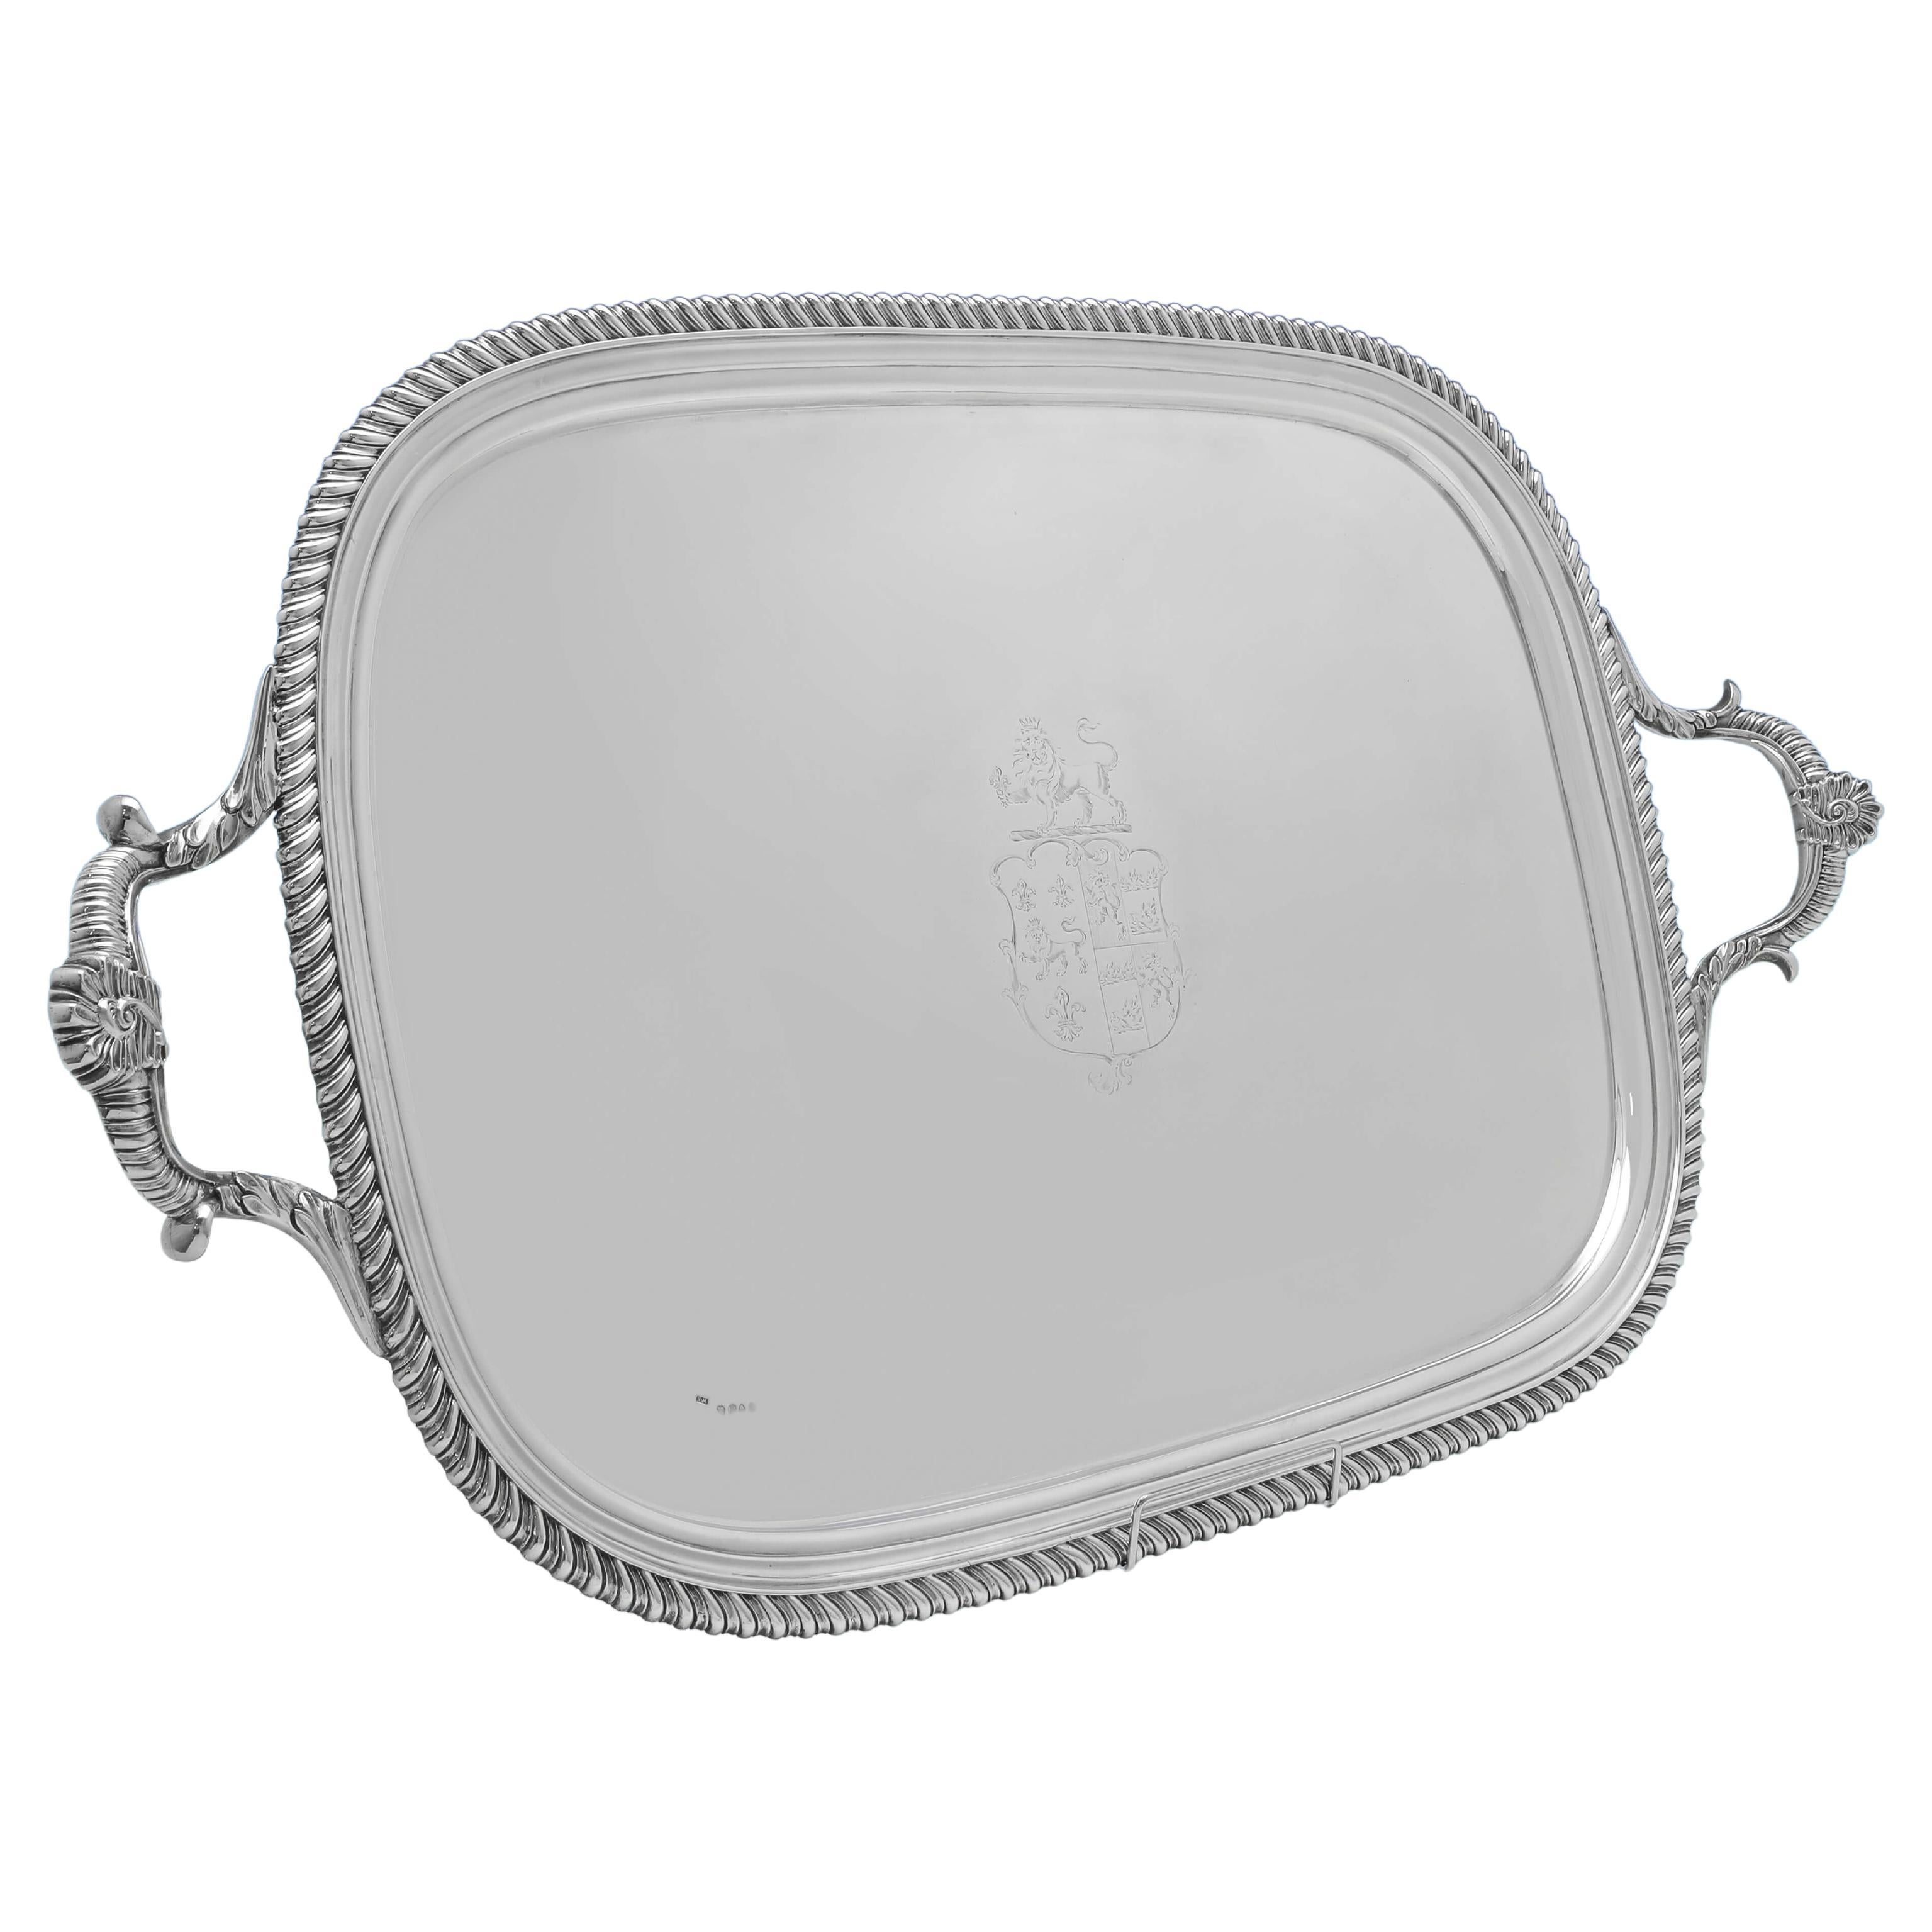 Large Regency Period Antique Sterling Silver Tray - London 1813 - 5.44kg Weight For Sale